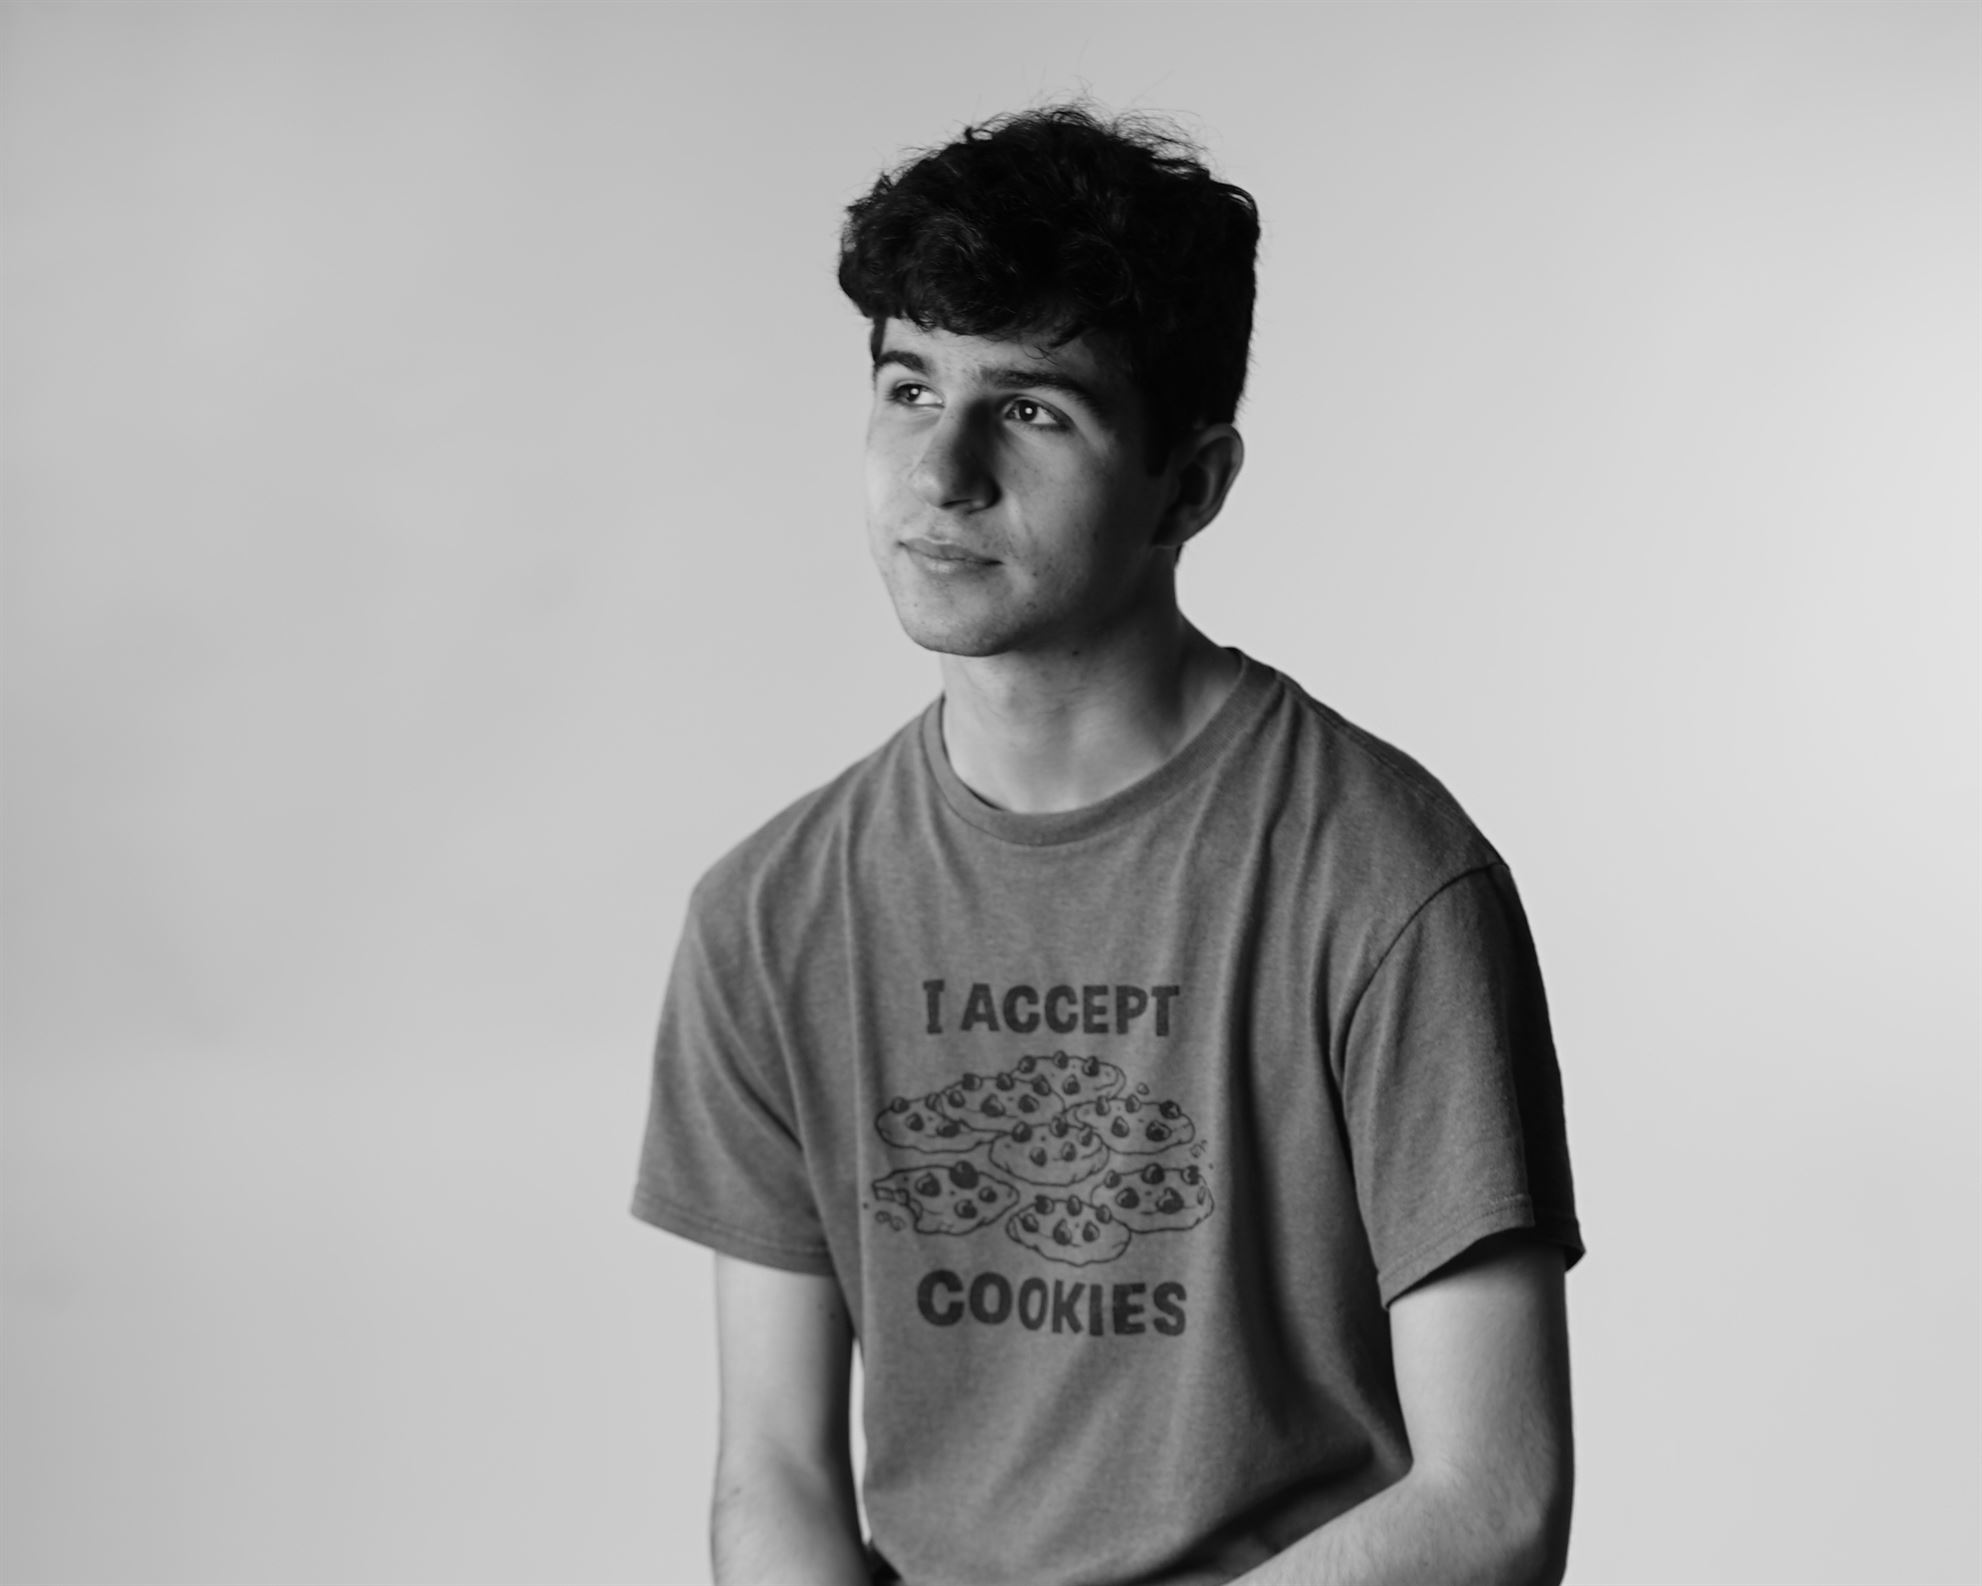 Peter Di Prospero is responsible for creating a community of filmmakers at Montclair State University through discord and Instagram. Photo taken by Richárd Kelemen.